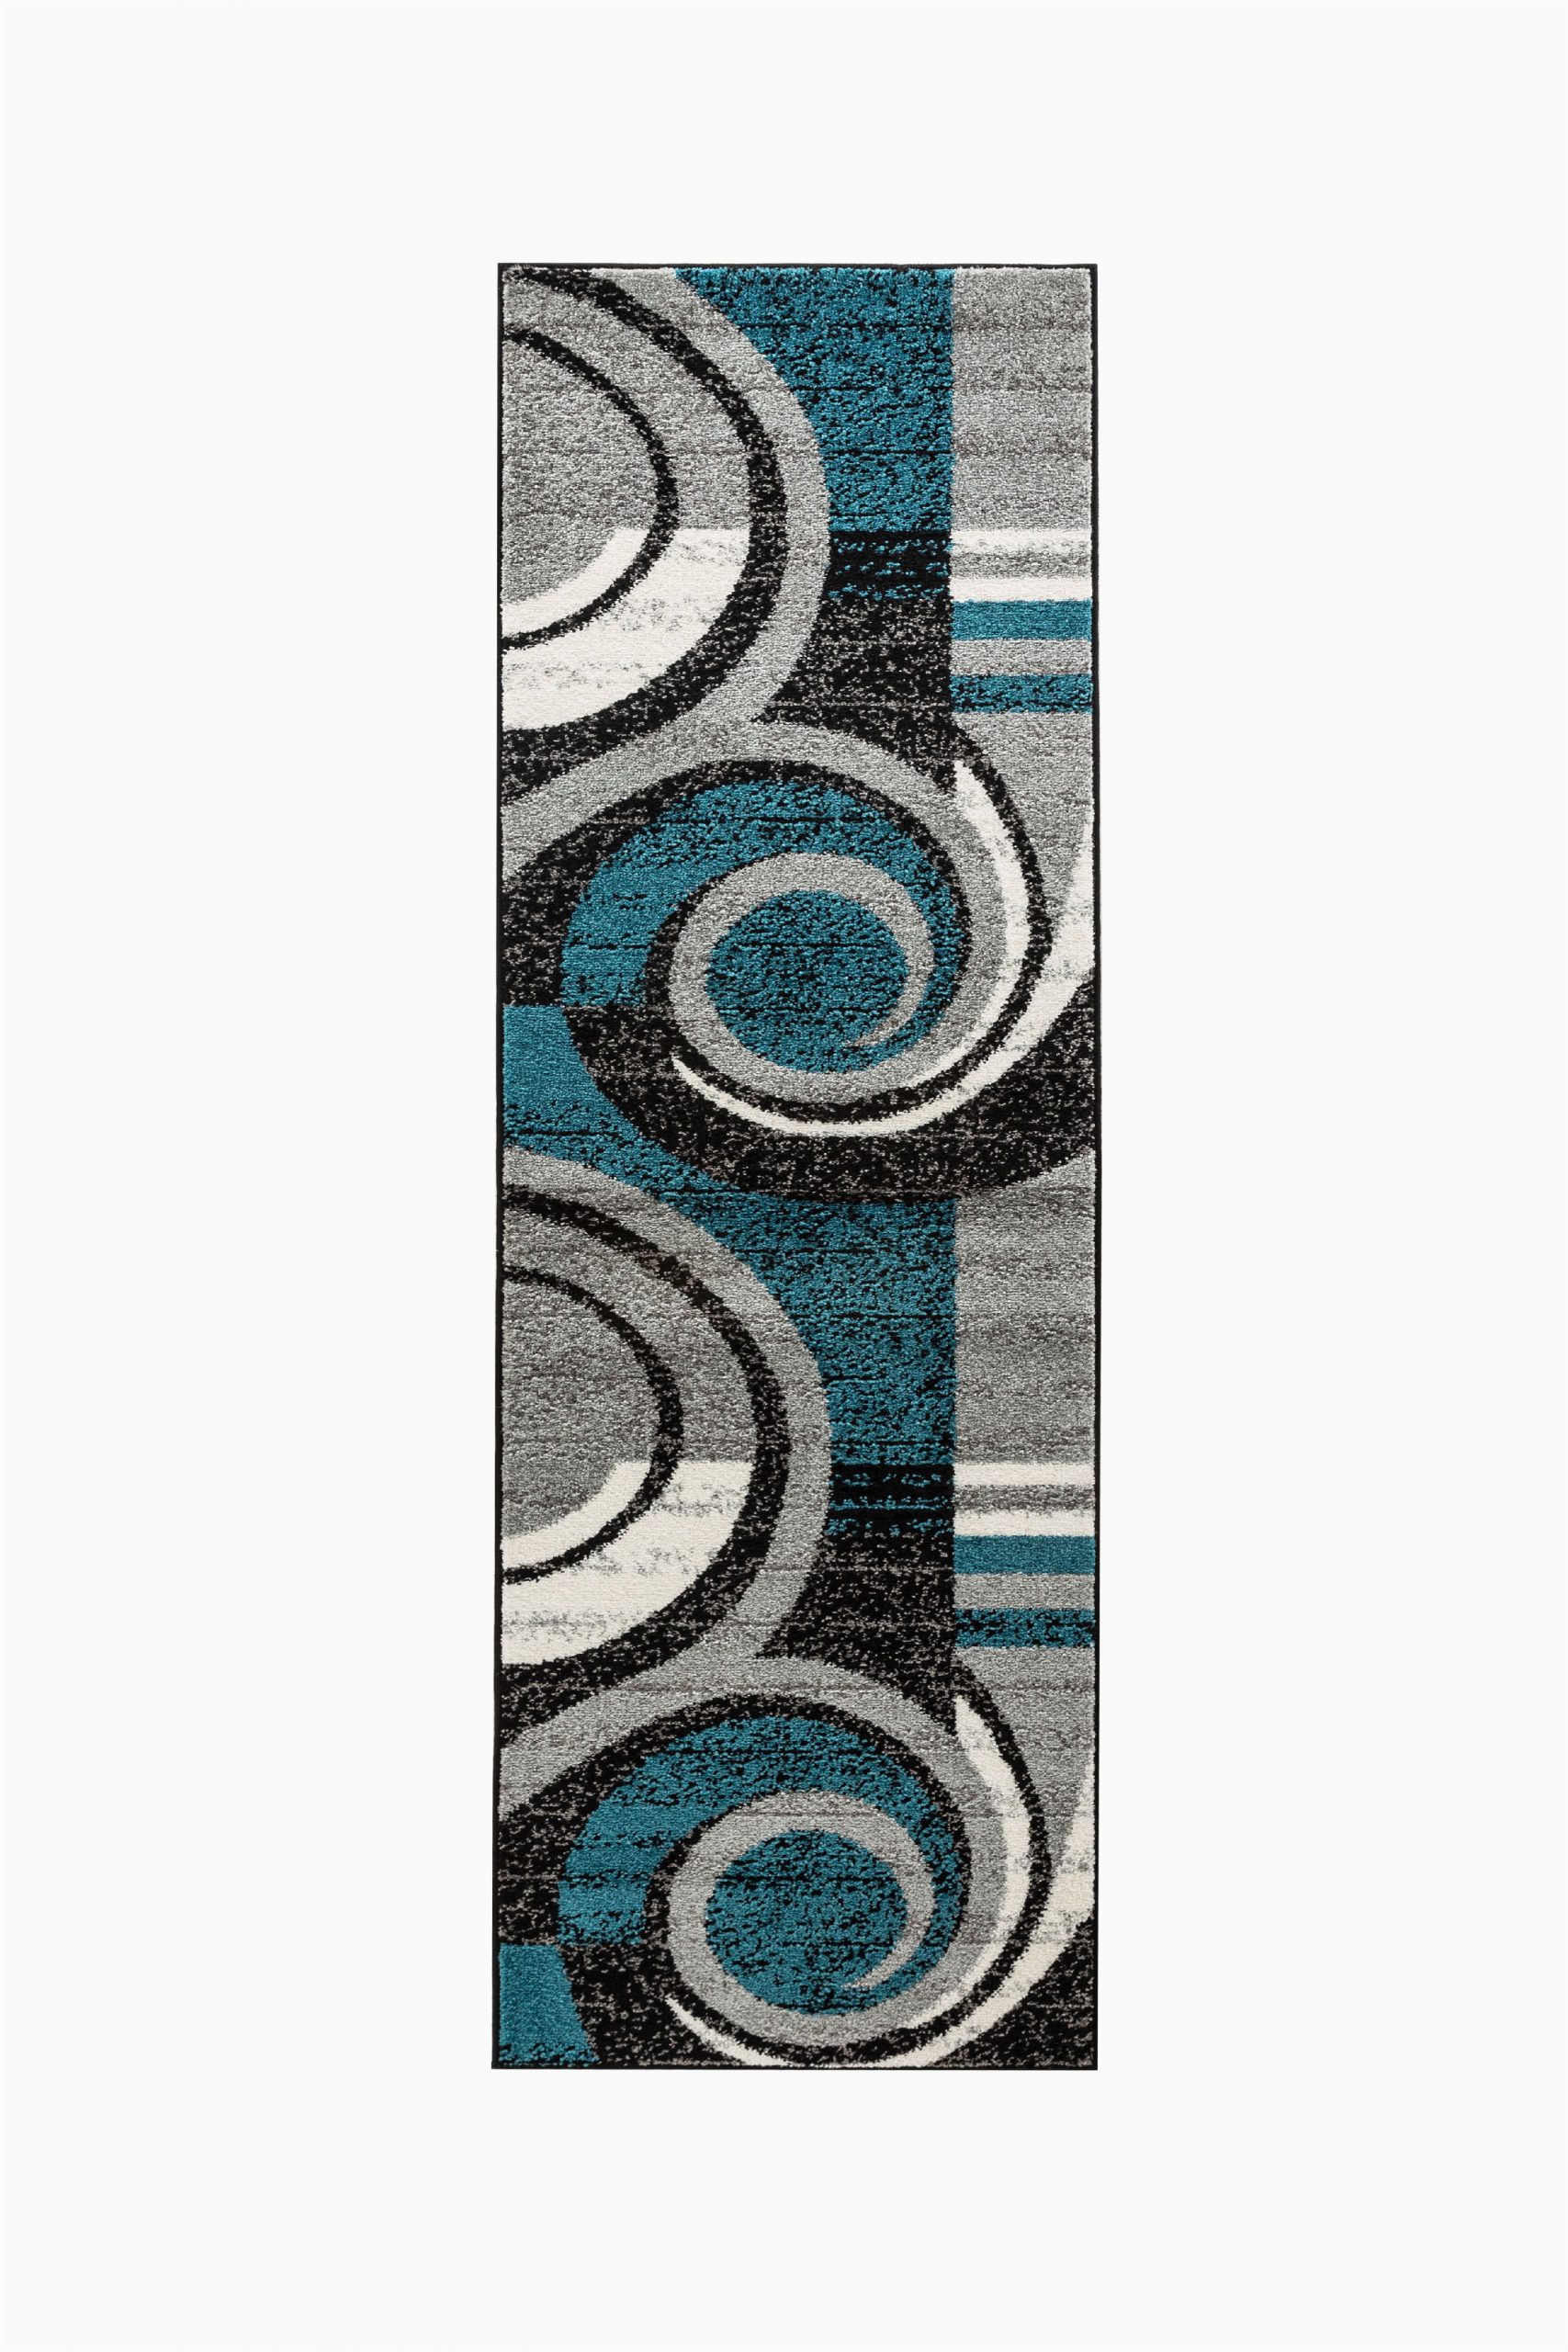 Grey White and Teal area Rug Oxford Collection Rugs Teal Black Grey White Swirls Retro Design Premiun soft area Rug 2 X7 Runner Walmart